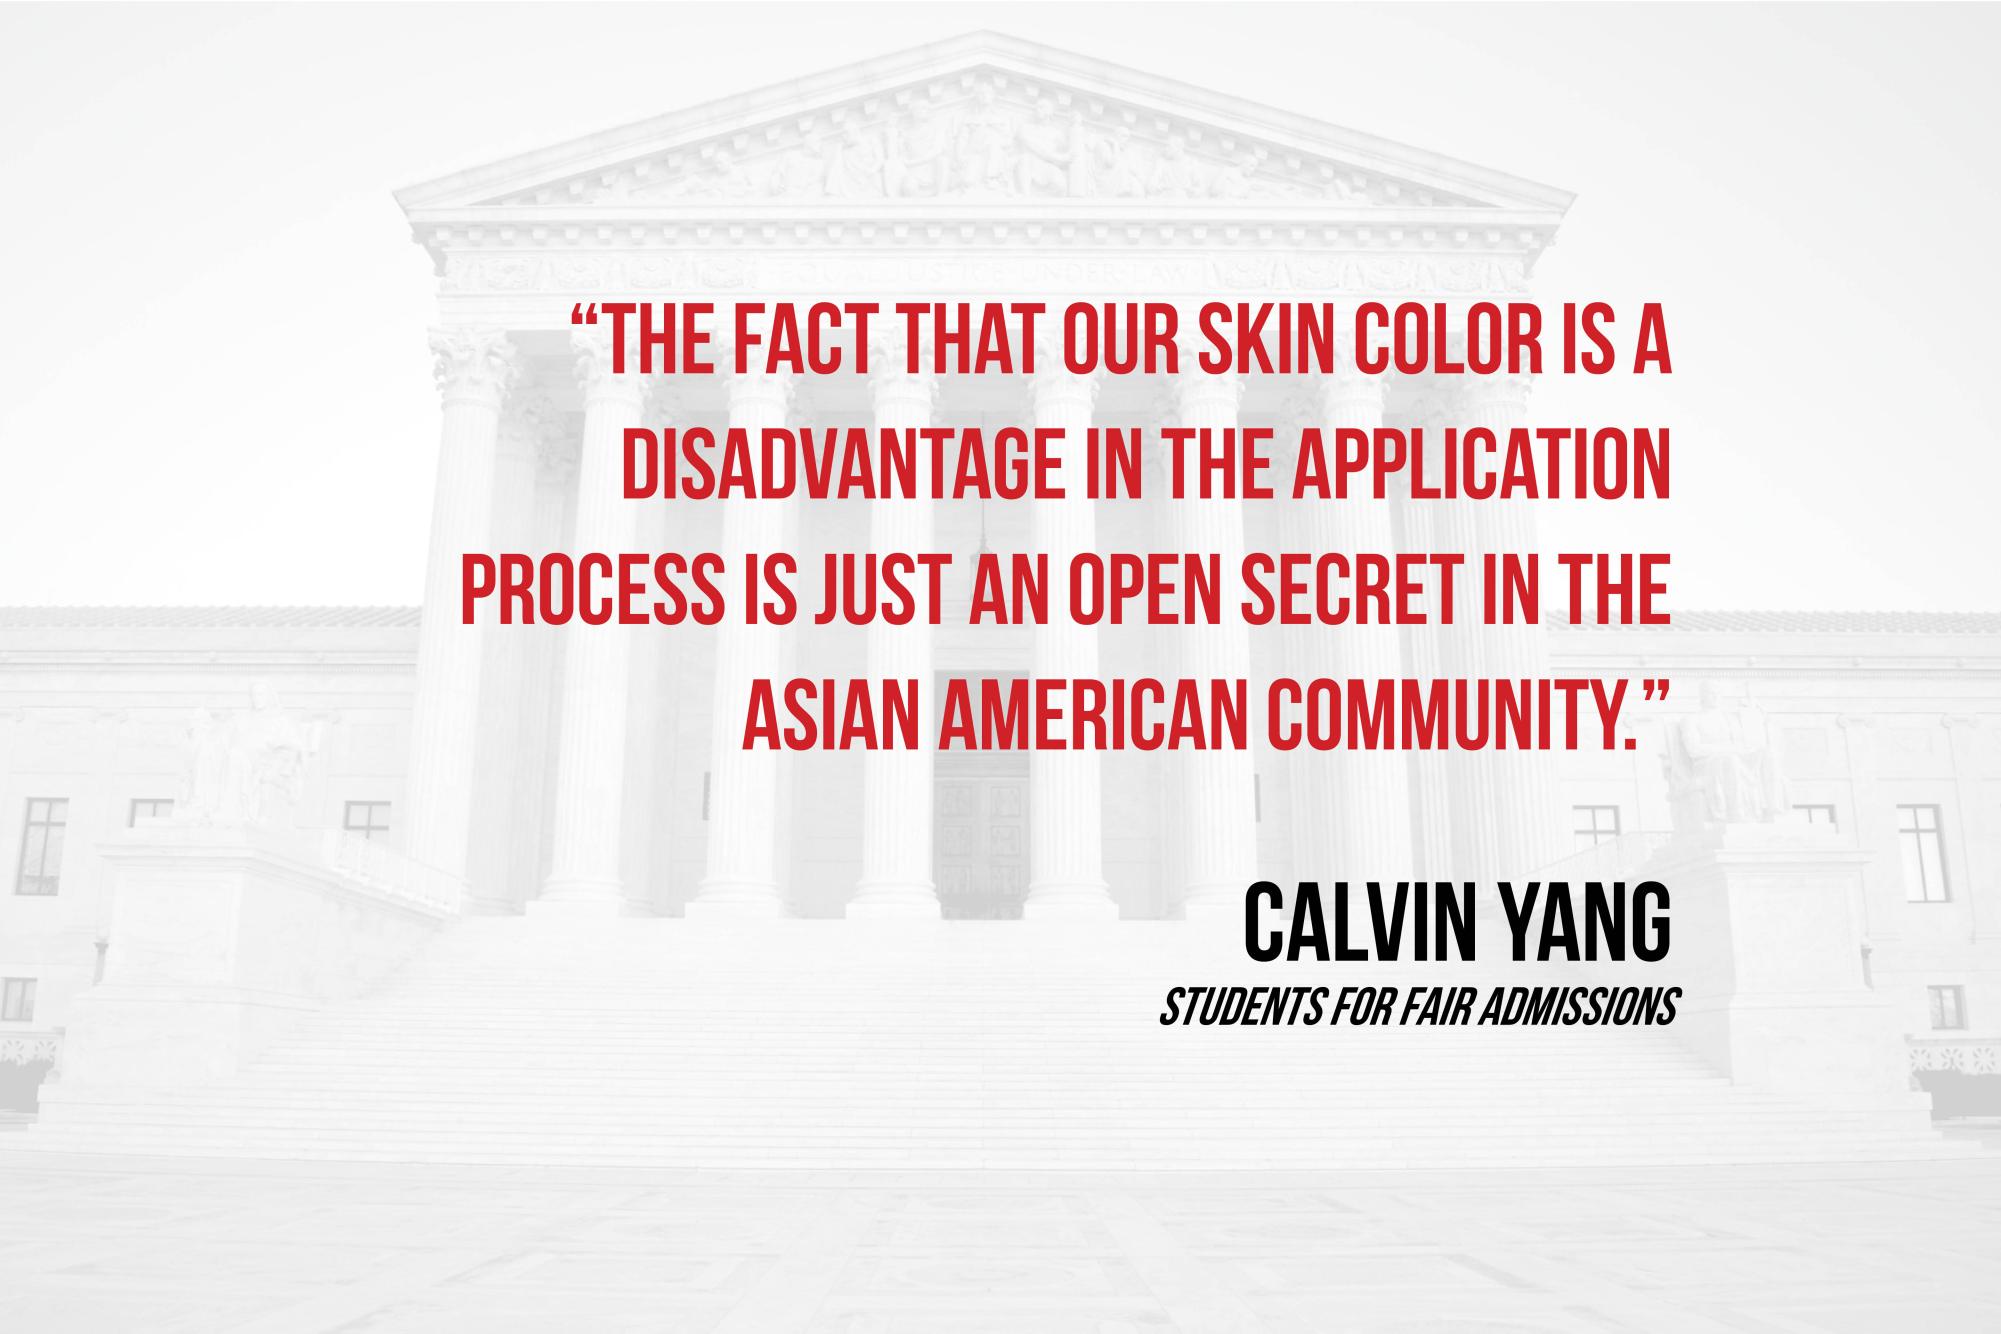 Yang quoted from the Supreme Court case SFFA v. Harvard and SFFA v. UNC that effectively eliminated affirmative action.